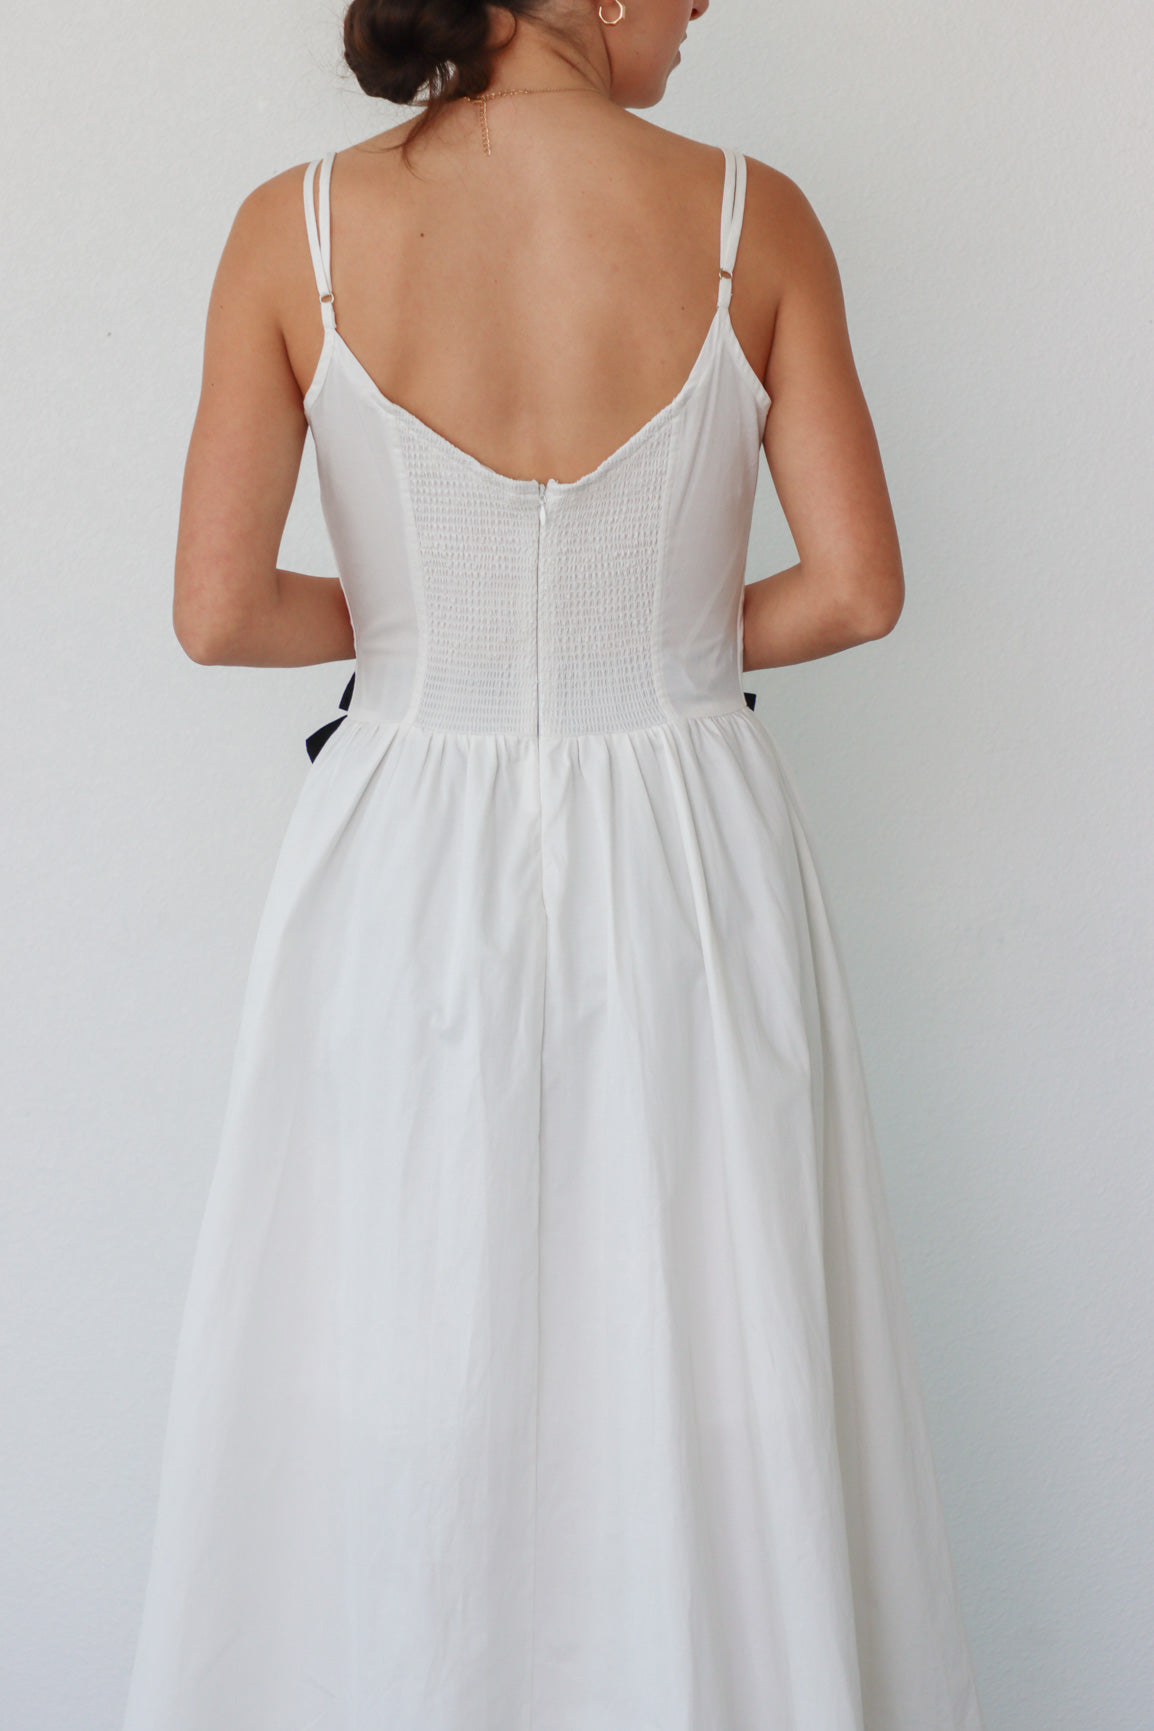 girl wearing white long dress with black bow details